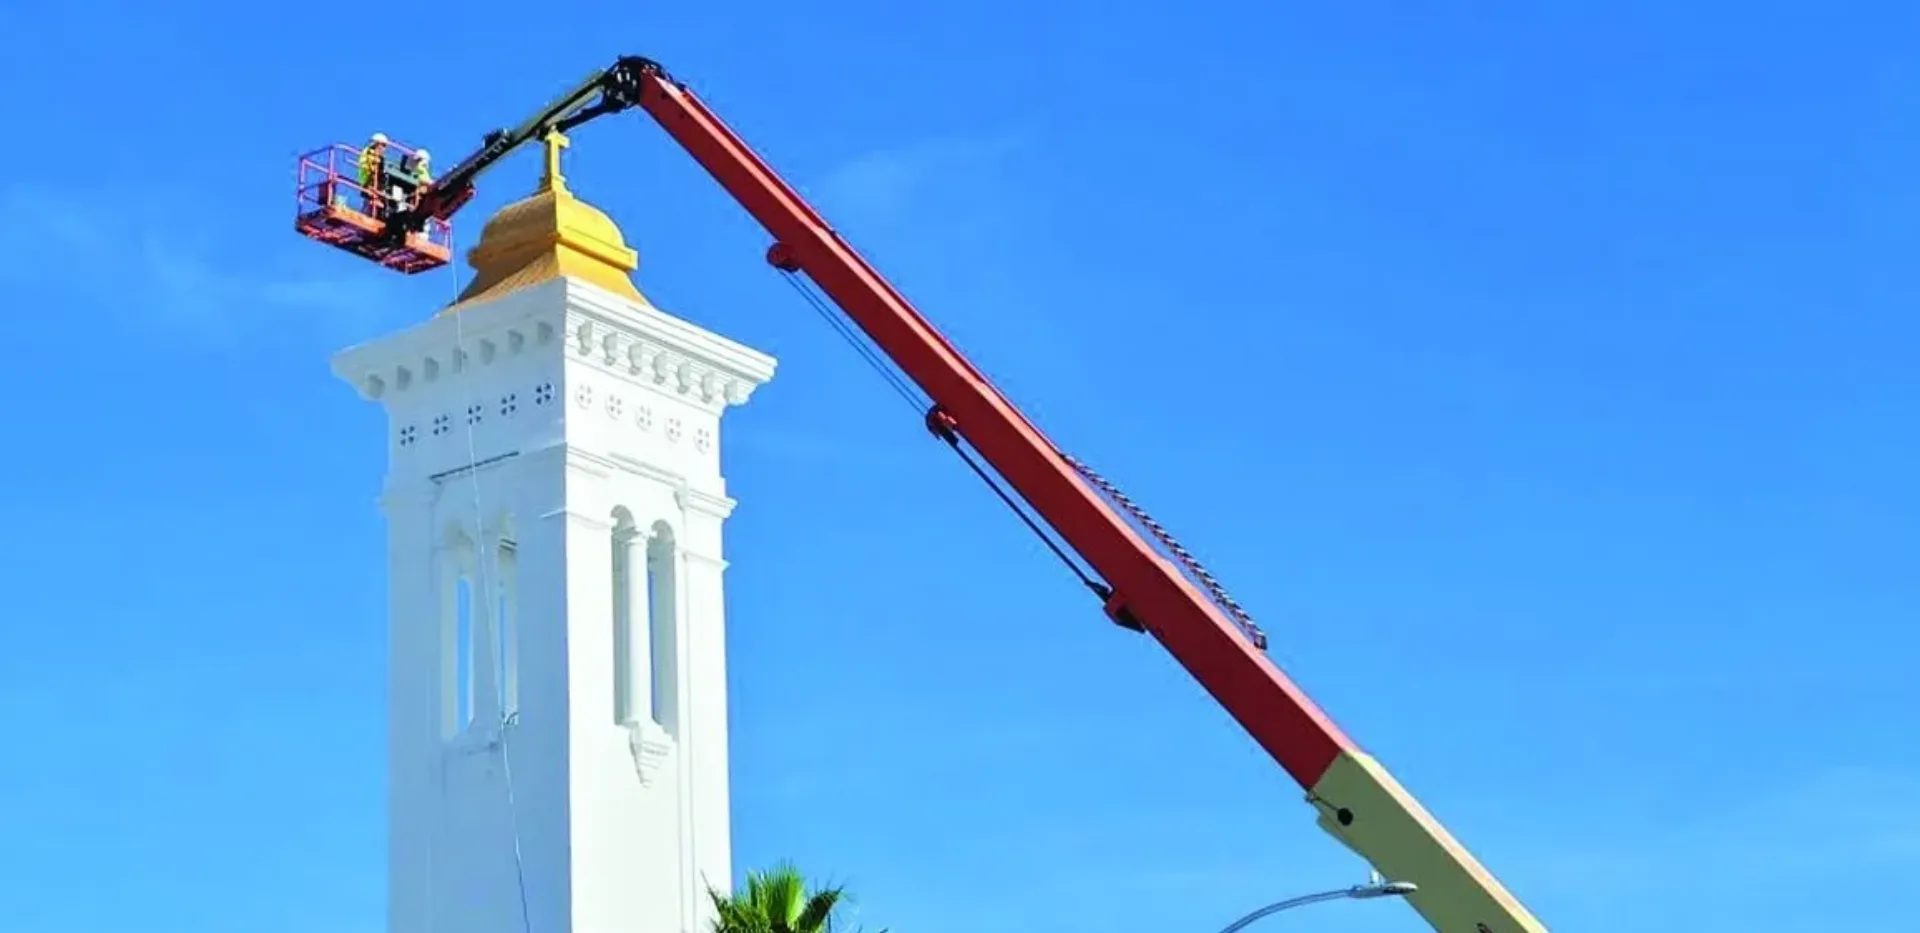 A crane standing in front of a building